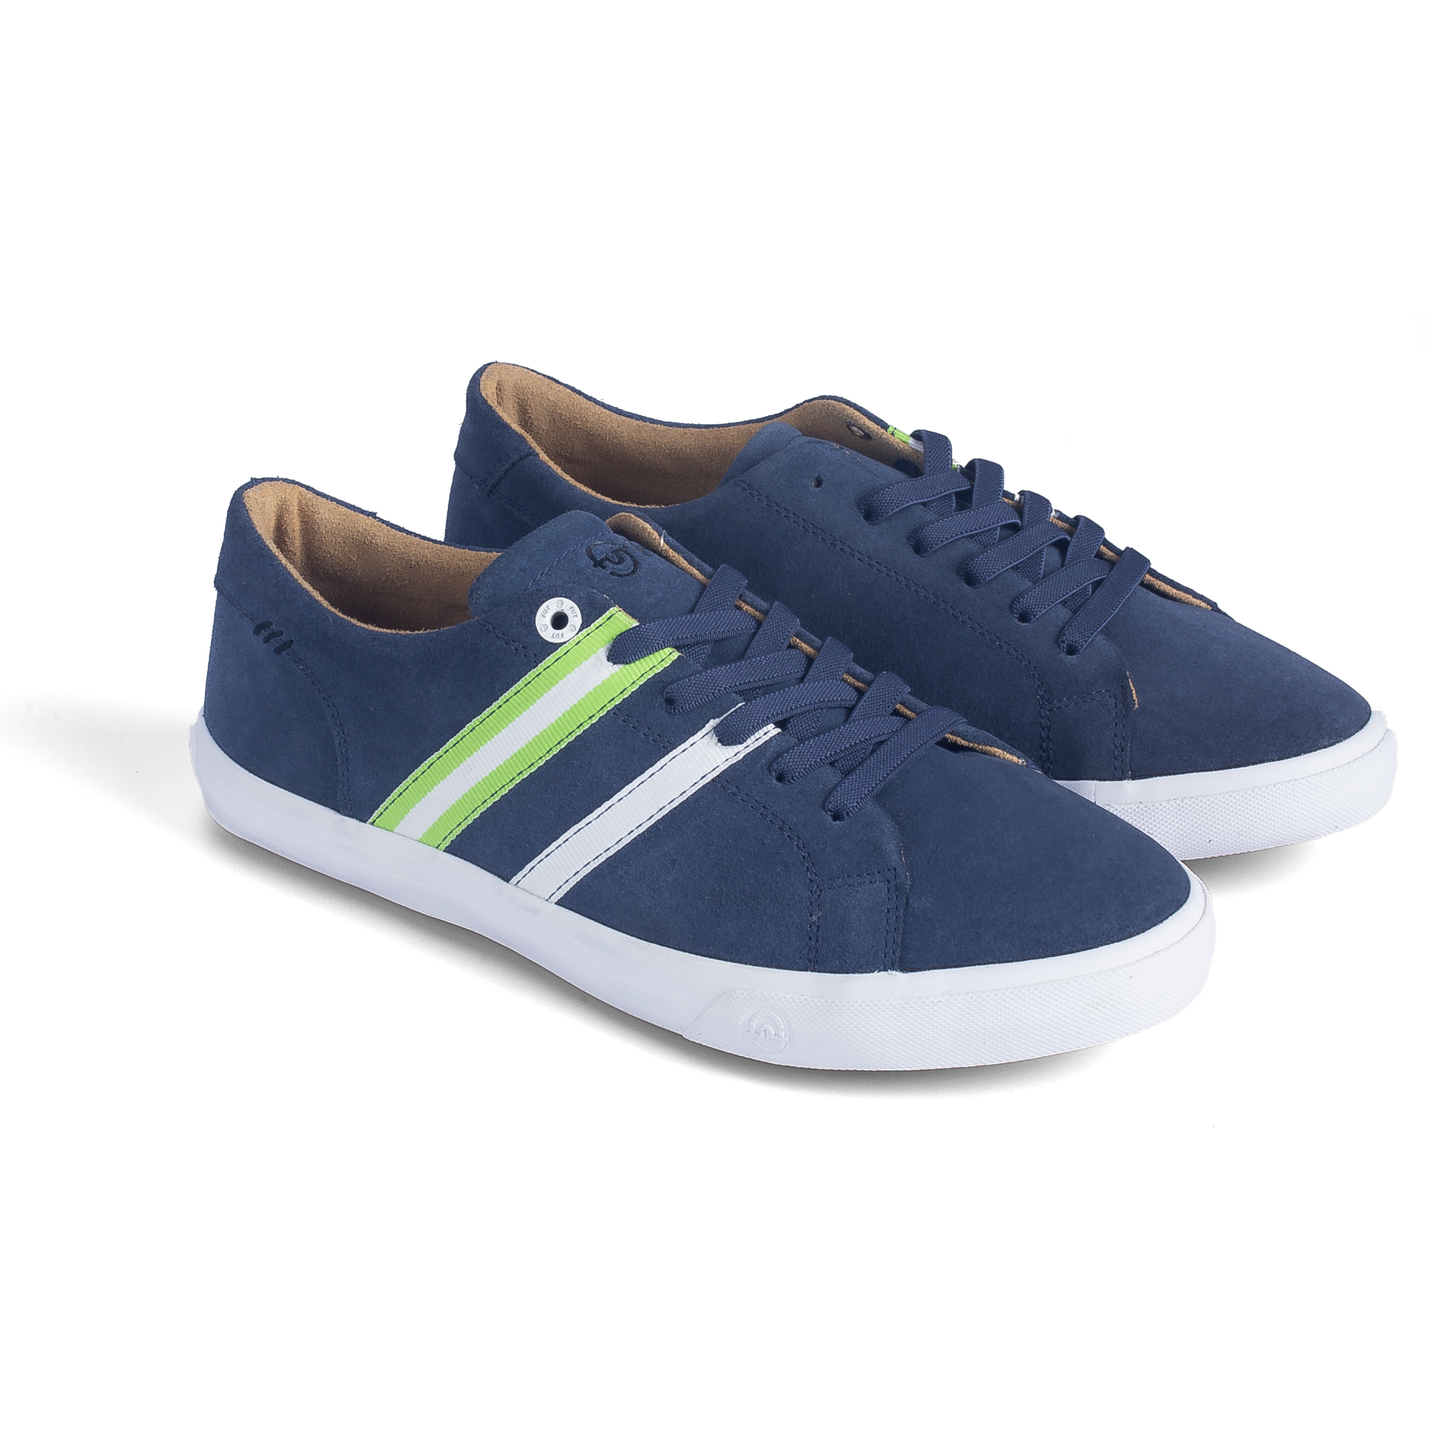 Walking in Comfort Wide Fit Leather Footwear by FUT in City Collection Bogota Navy Green Grey Strips Top View